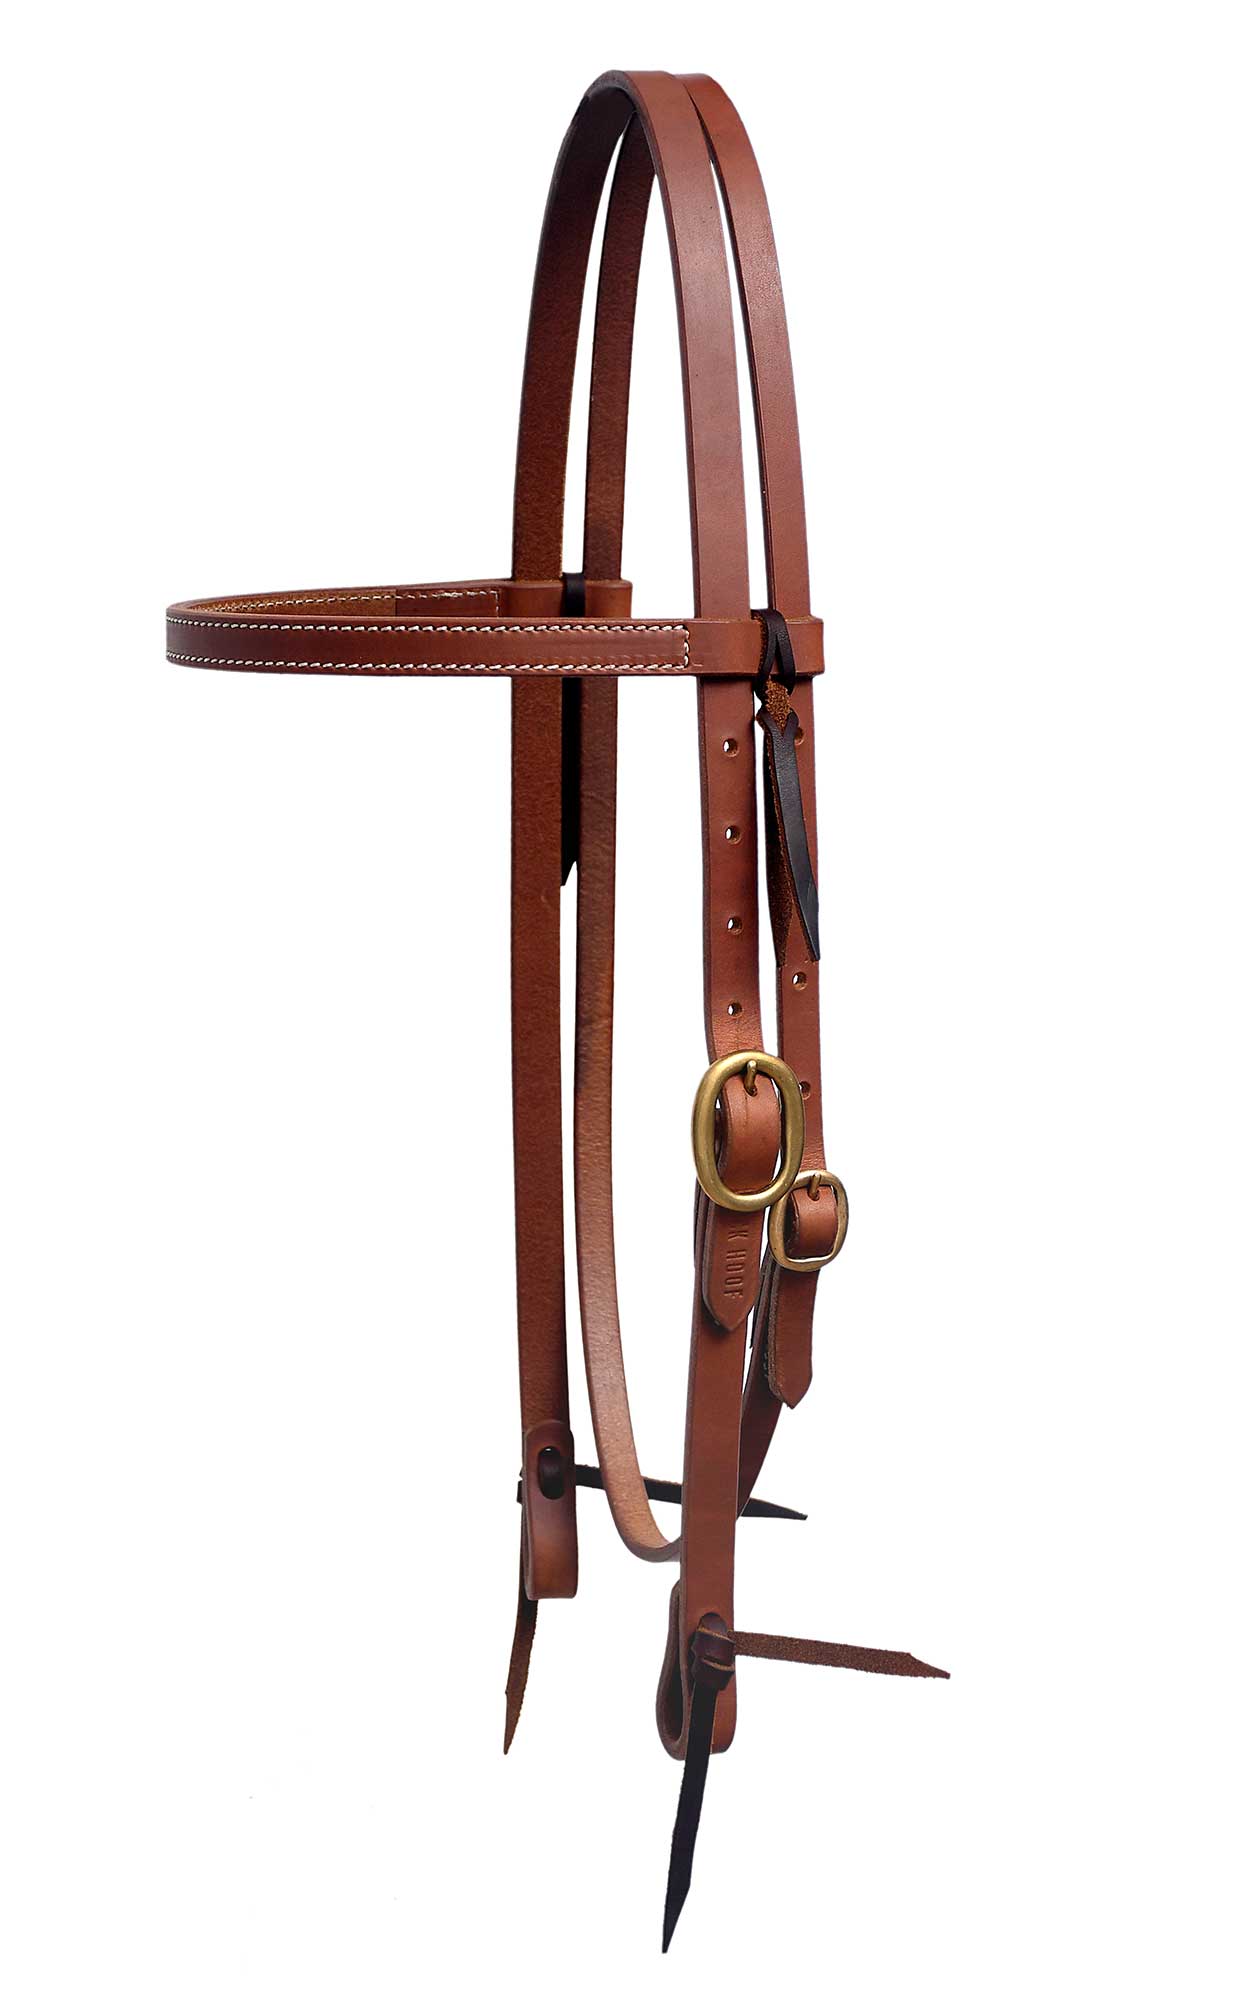 BLACK HOOF Straight Browband Working Tack Oiled Russet Harness Headstall